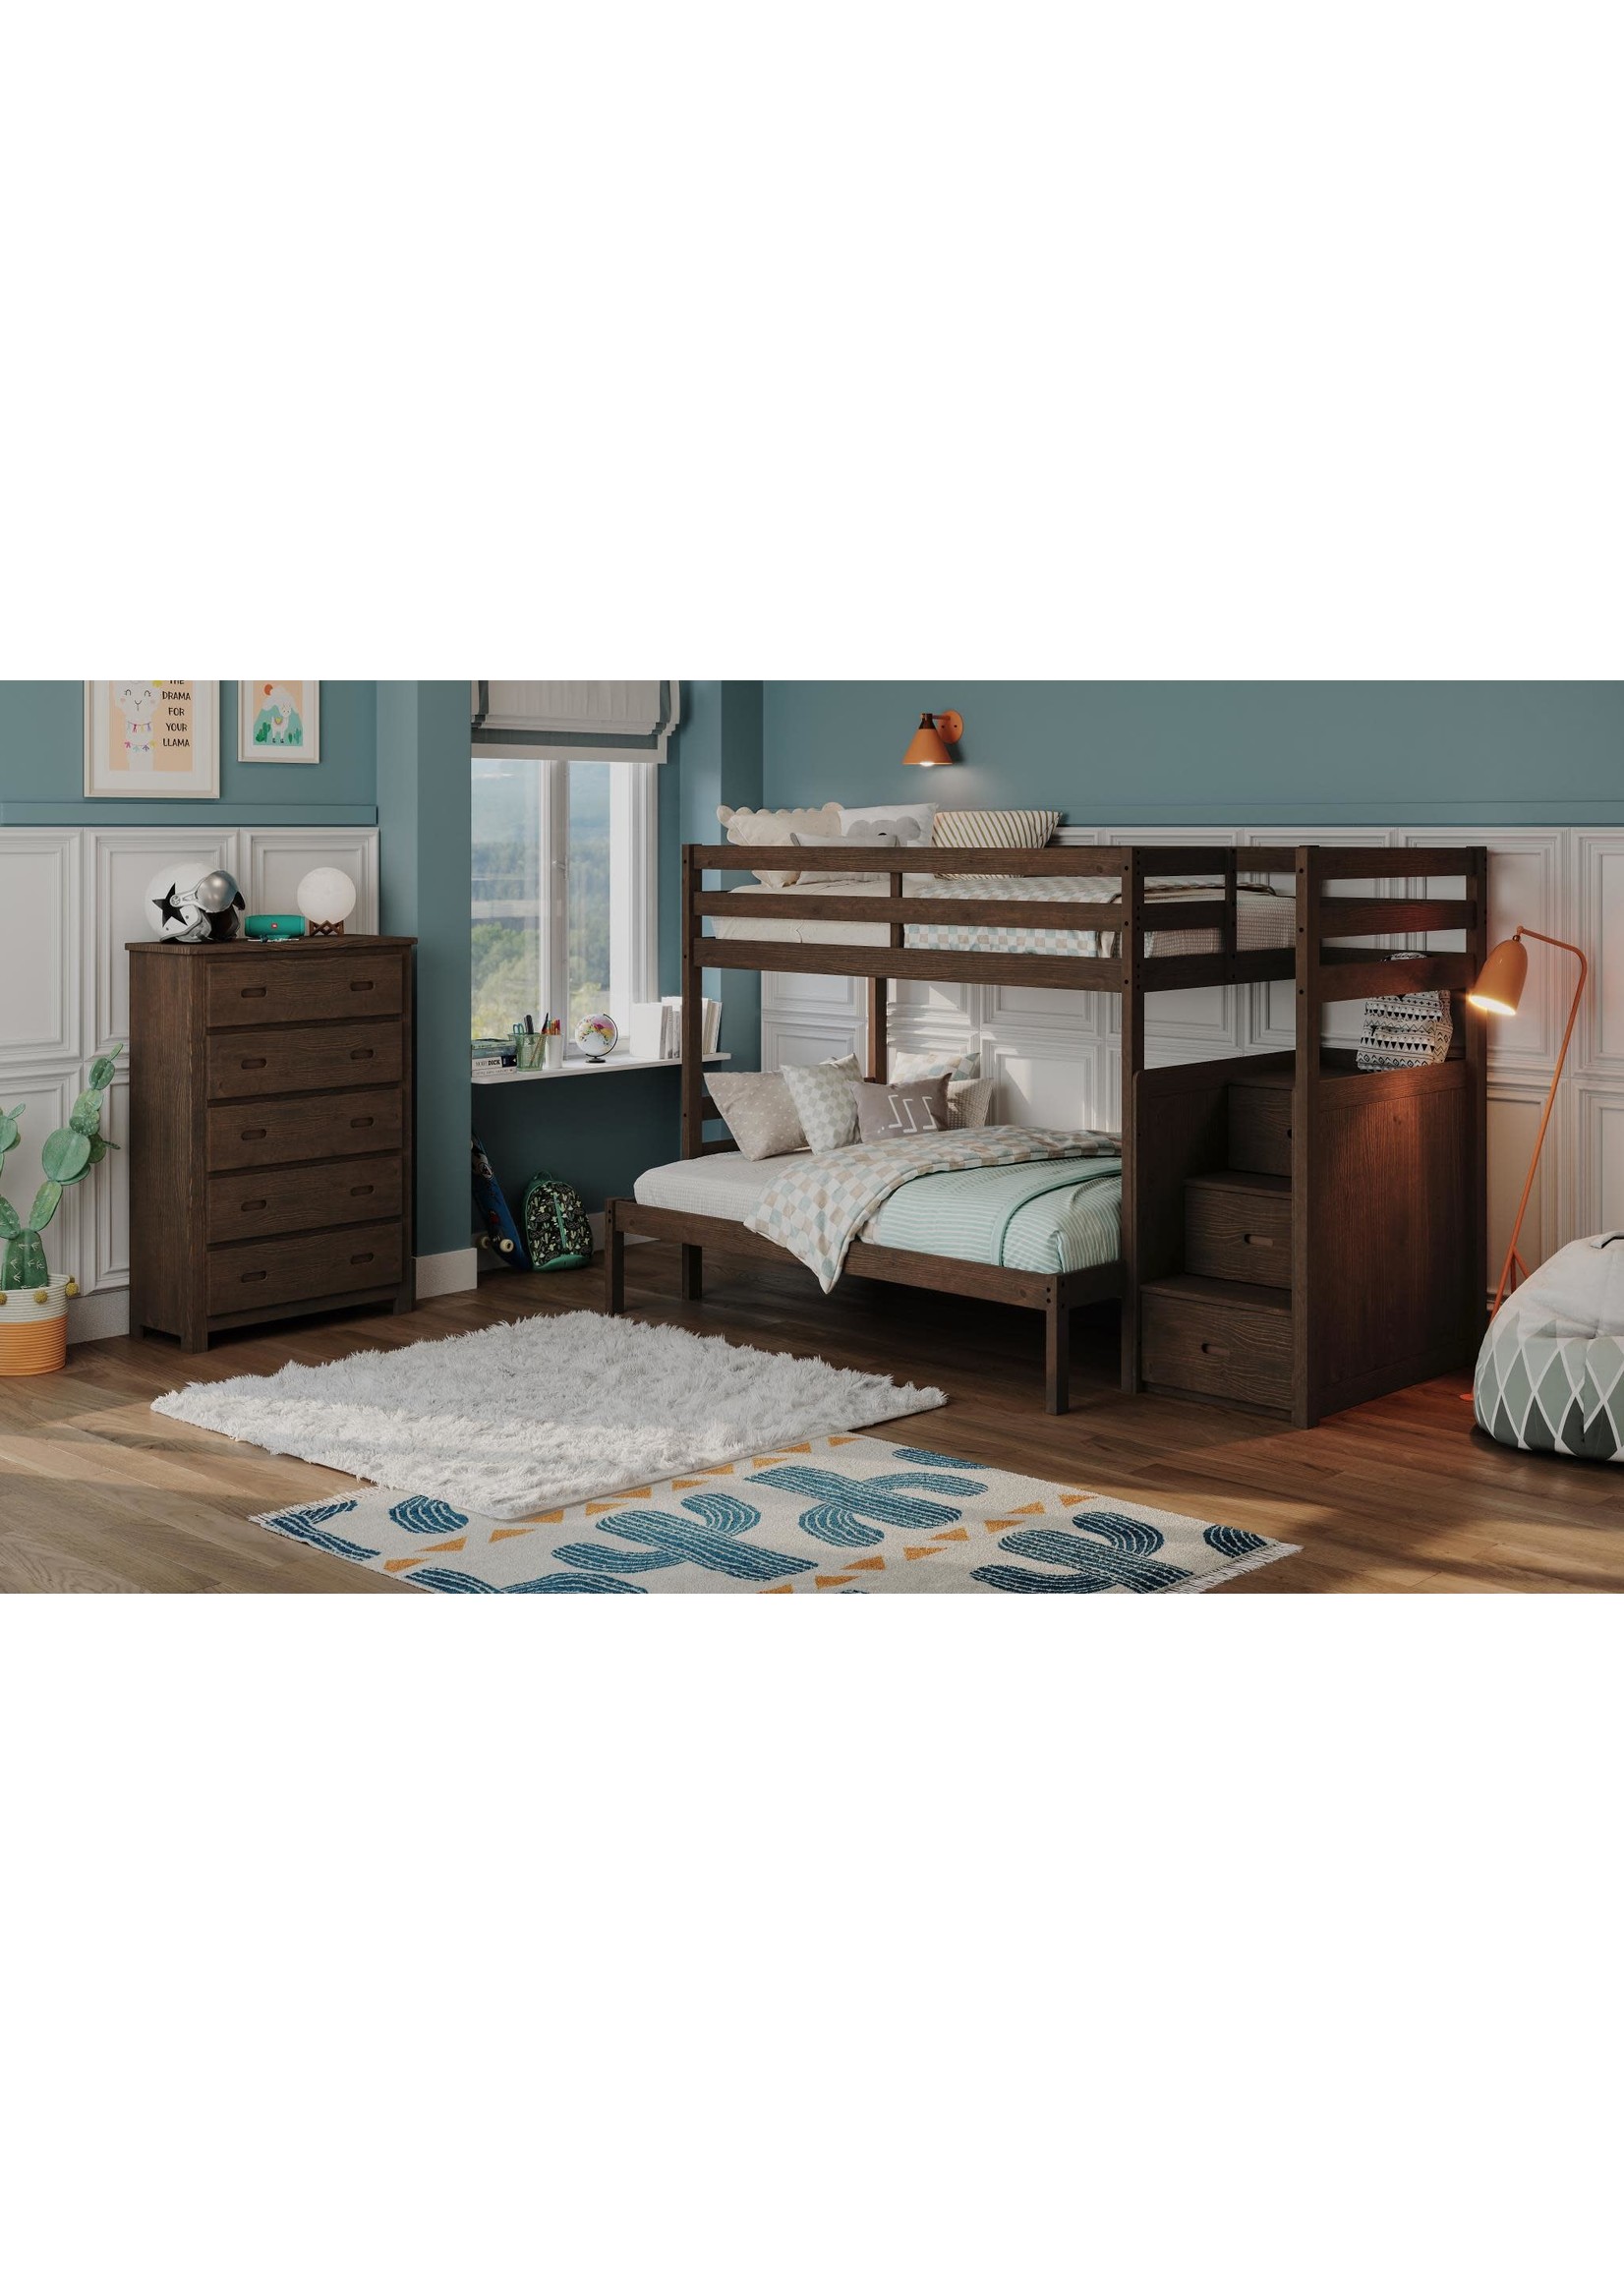 KITH FURNITURE 500-10/20/30/EXT/STR GRIZZLY BROWN BUNK BED W/STAIRS TWIN/FULL